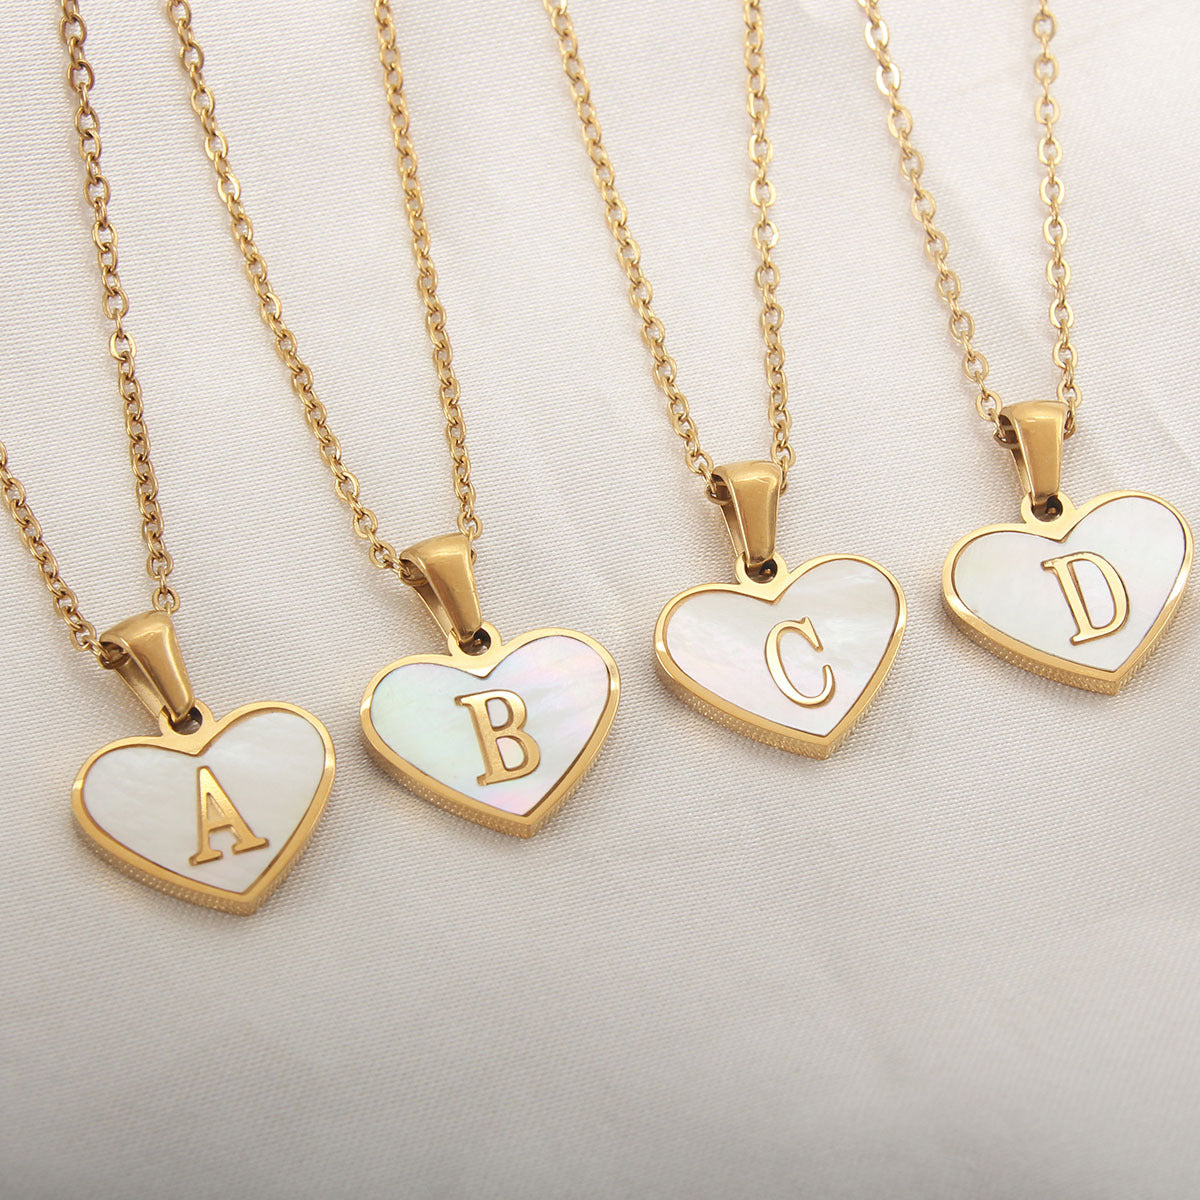 Cherished Initials Heart Pendant - Your Love in a Necklace